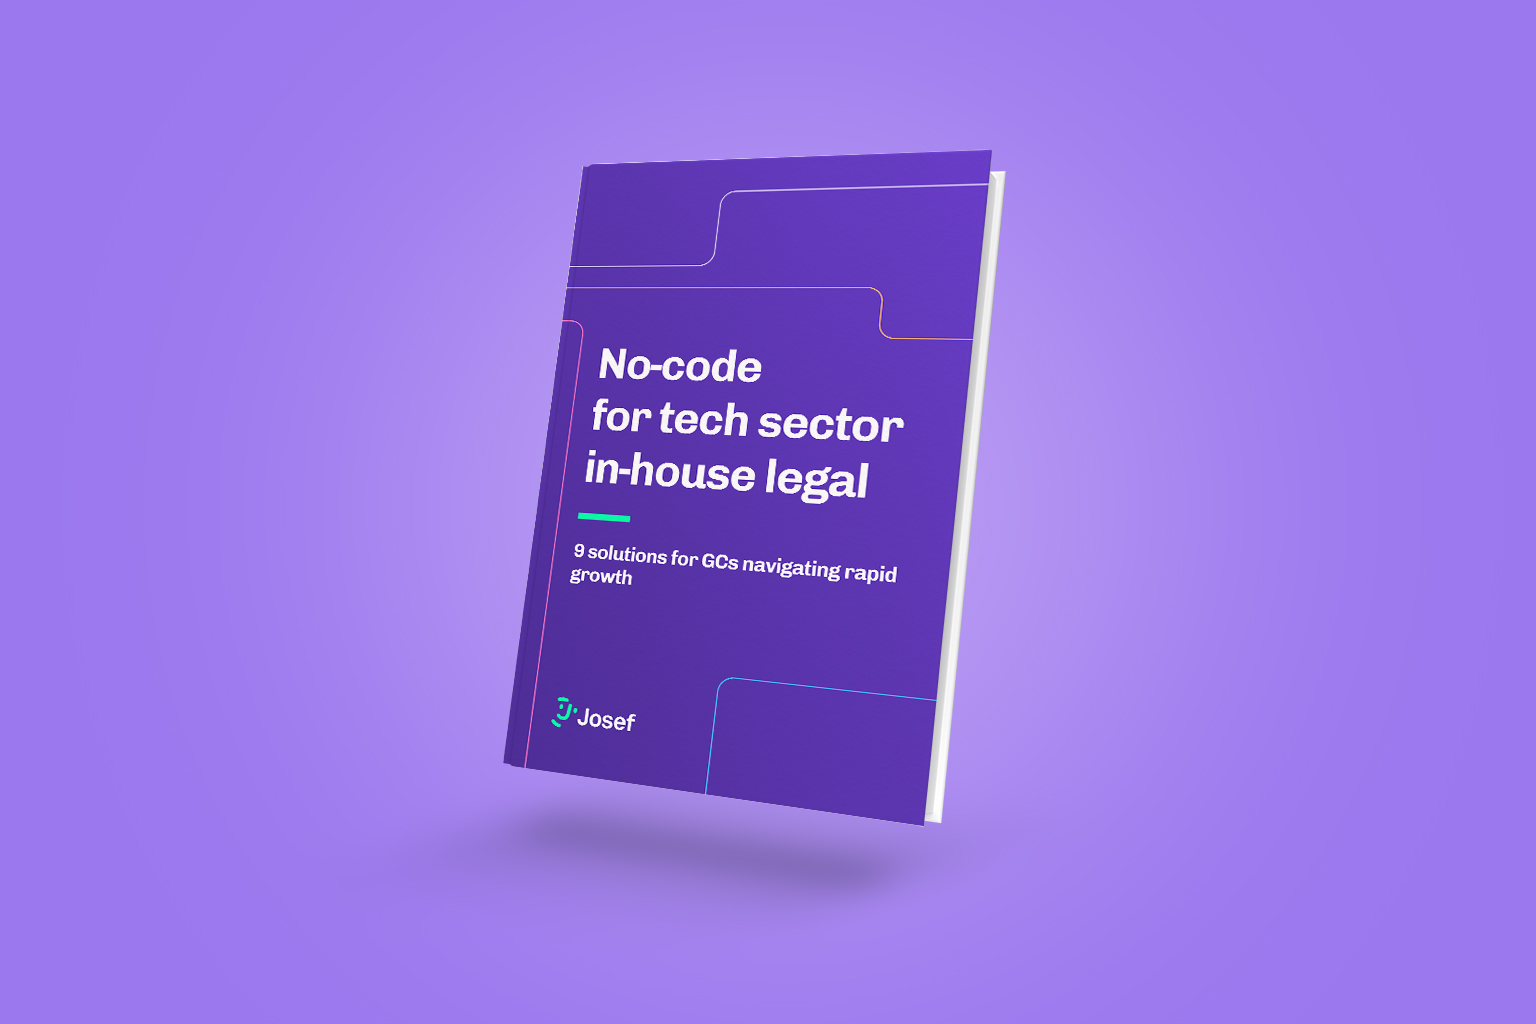 ebok-no-code-for-tech-sector-in-house-legal-purple